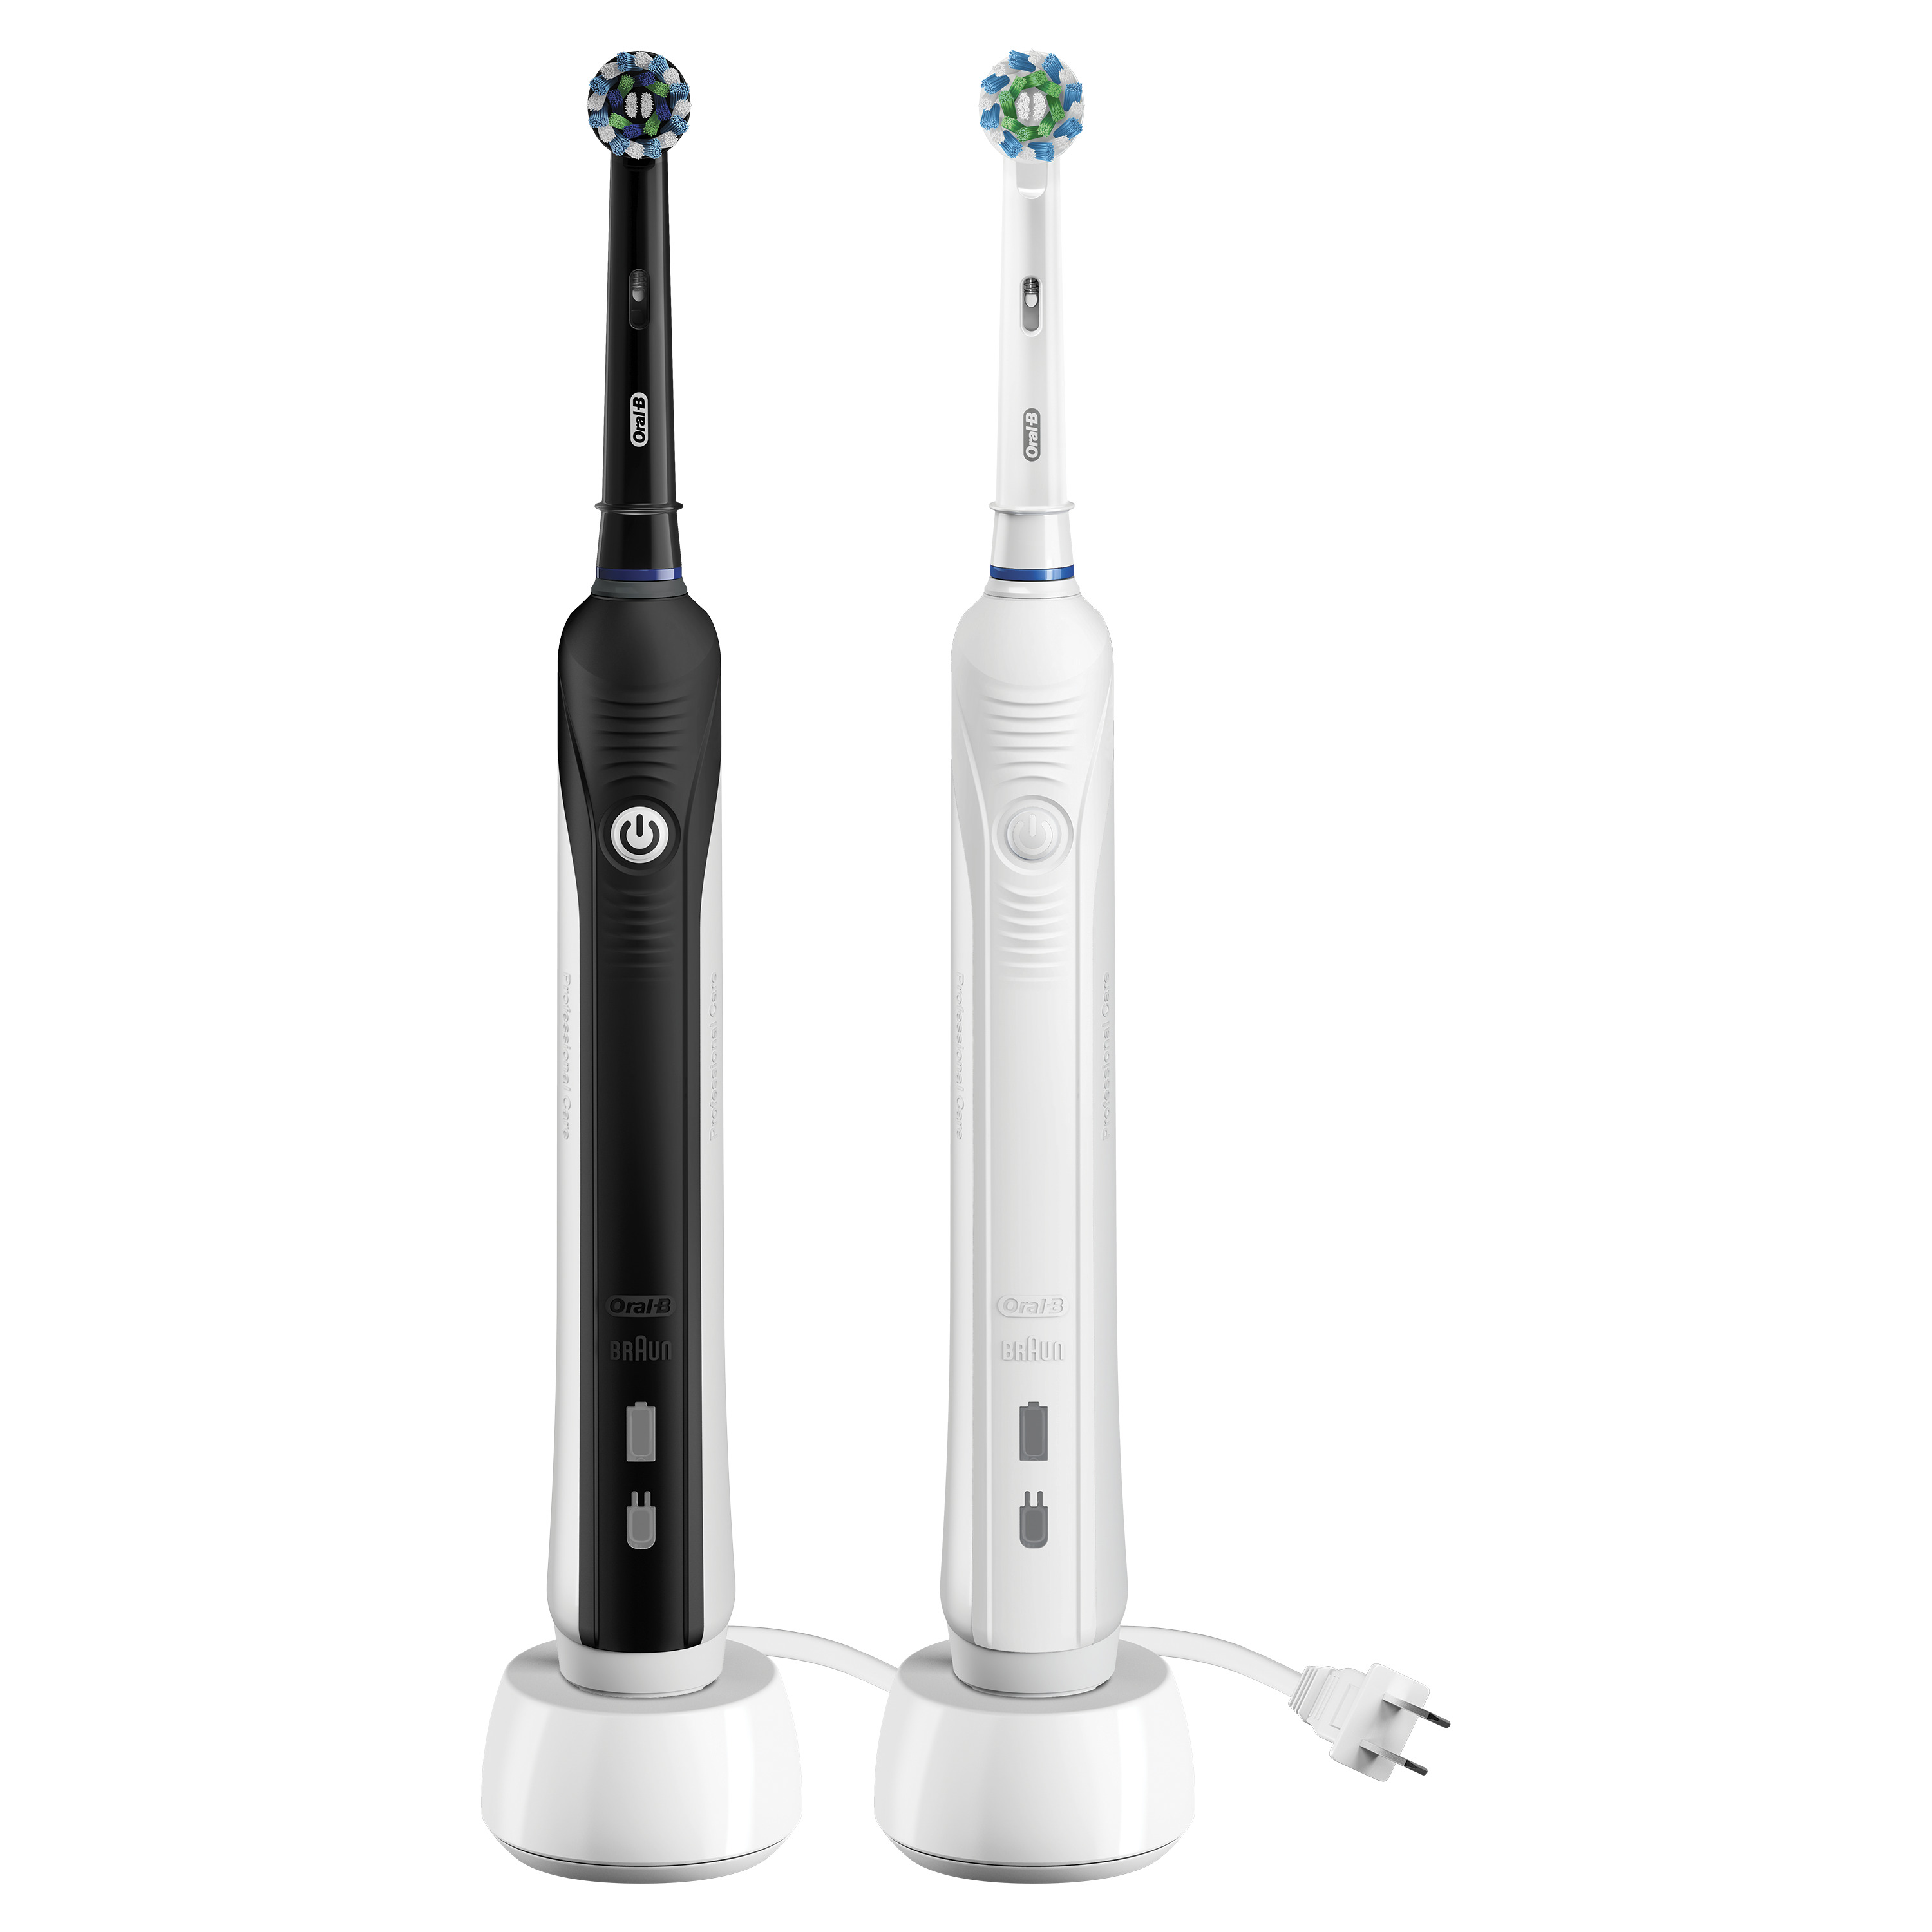 Oral-B Pro 1000 CrossAction Electric Toothbrush, Powered by Braun, Black and White, Pack of 2 - image 1 of 7